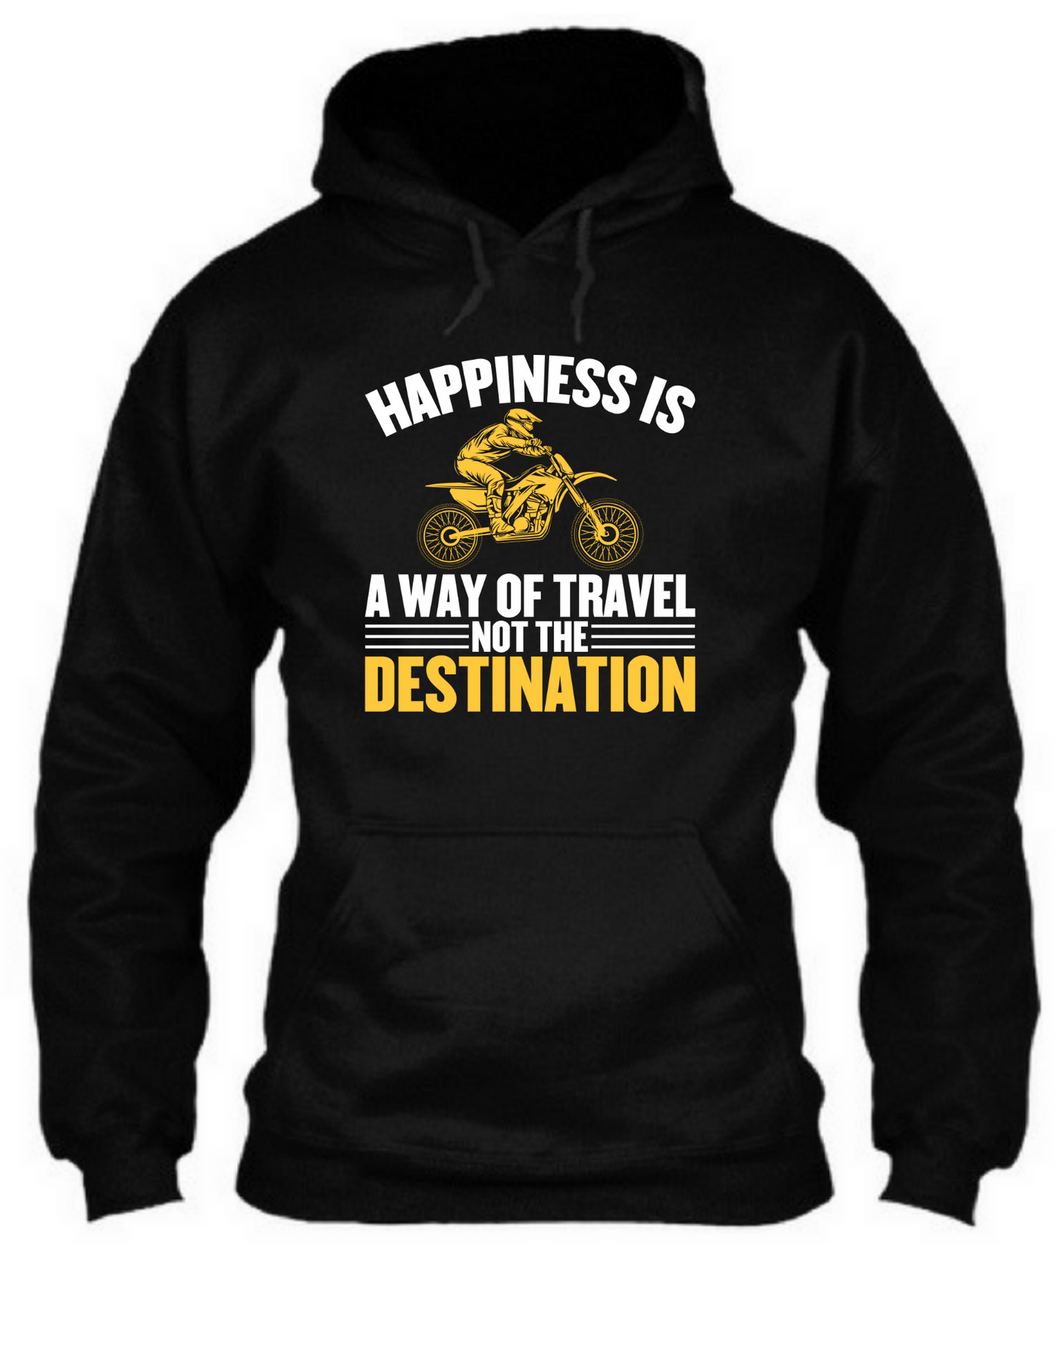 Happiness is a way of travel not the destination - Unisex Hoodie